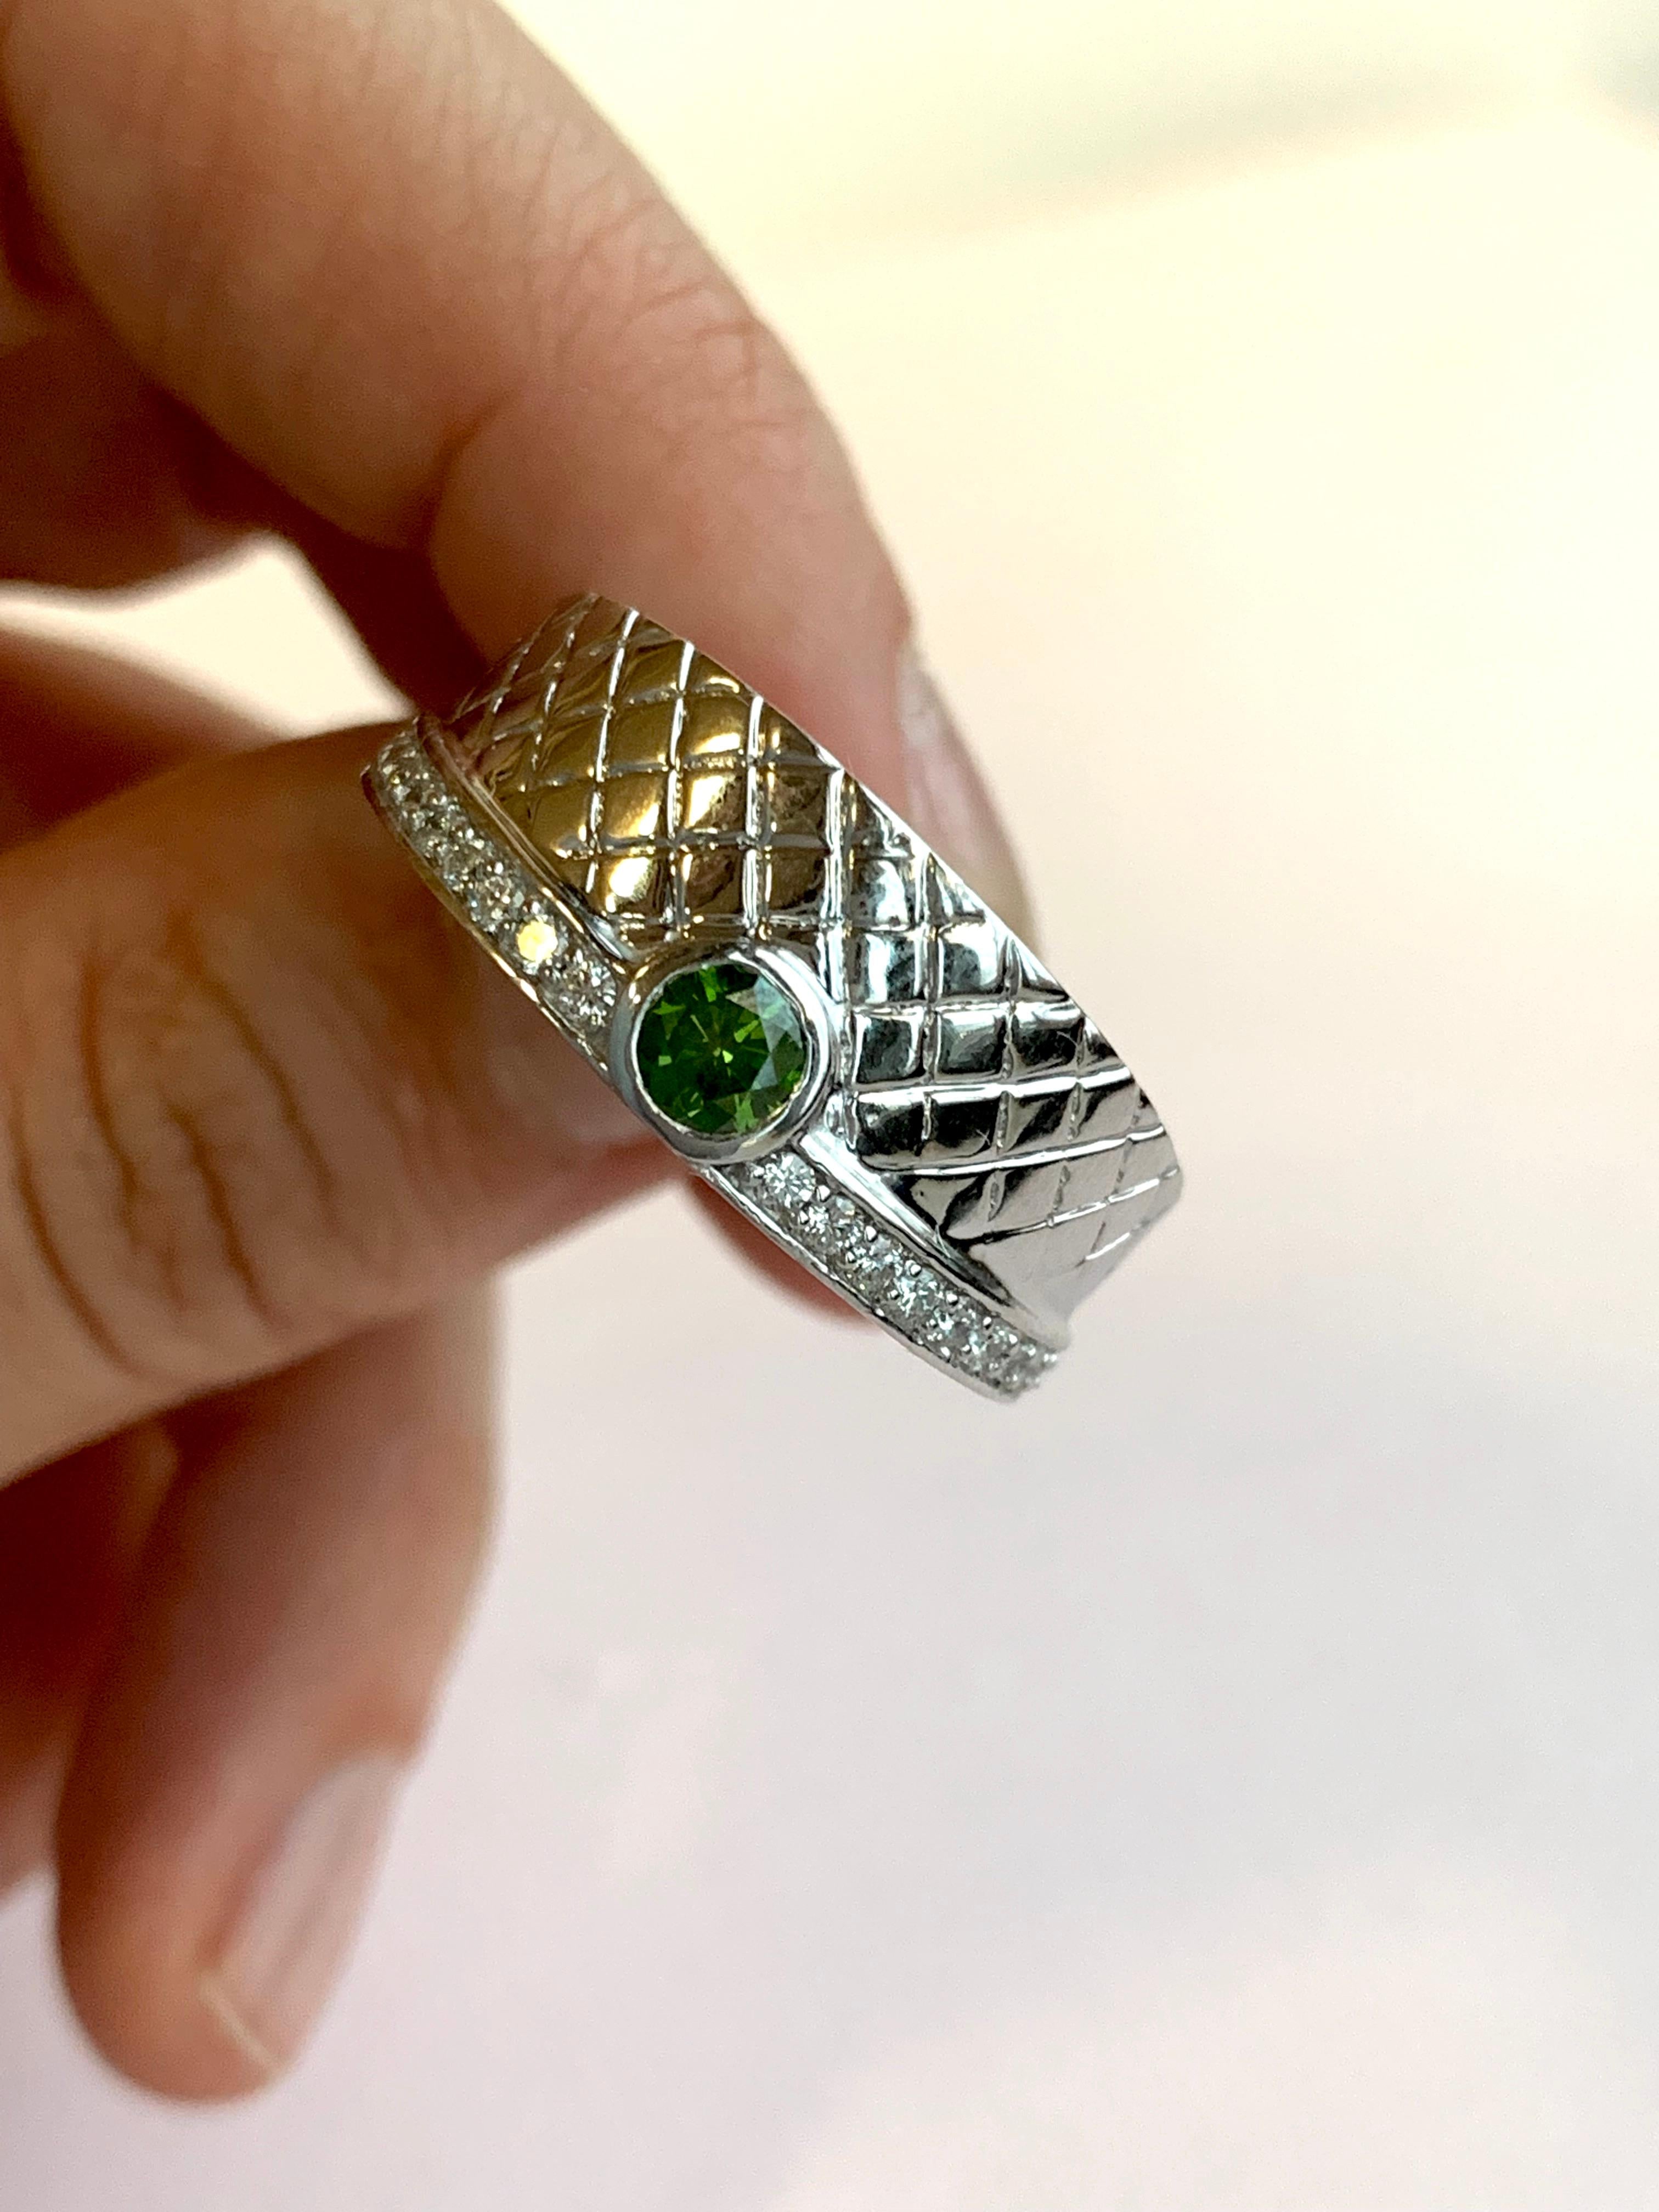 Material: 14k White Gold
Colored Diamond: 1 Round Green Diamond at 0.30 Carats.
Diamonds: 20 Round White Diamonds at 0.30 Carats. SI Clarity / H-I Color. 
Ring Size: 9. Alberto offers complimentary sizing on all rings.

Fine one-of-a-kind